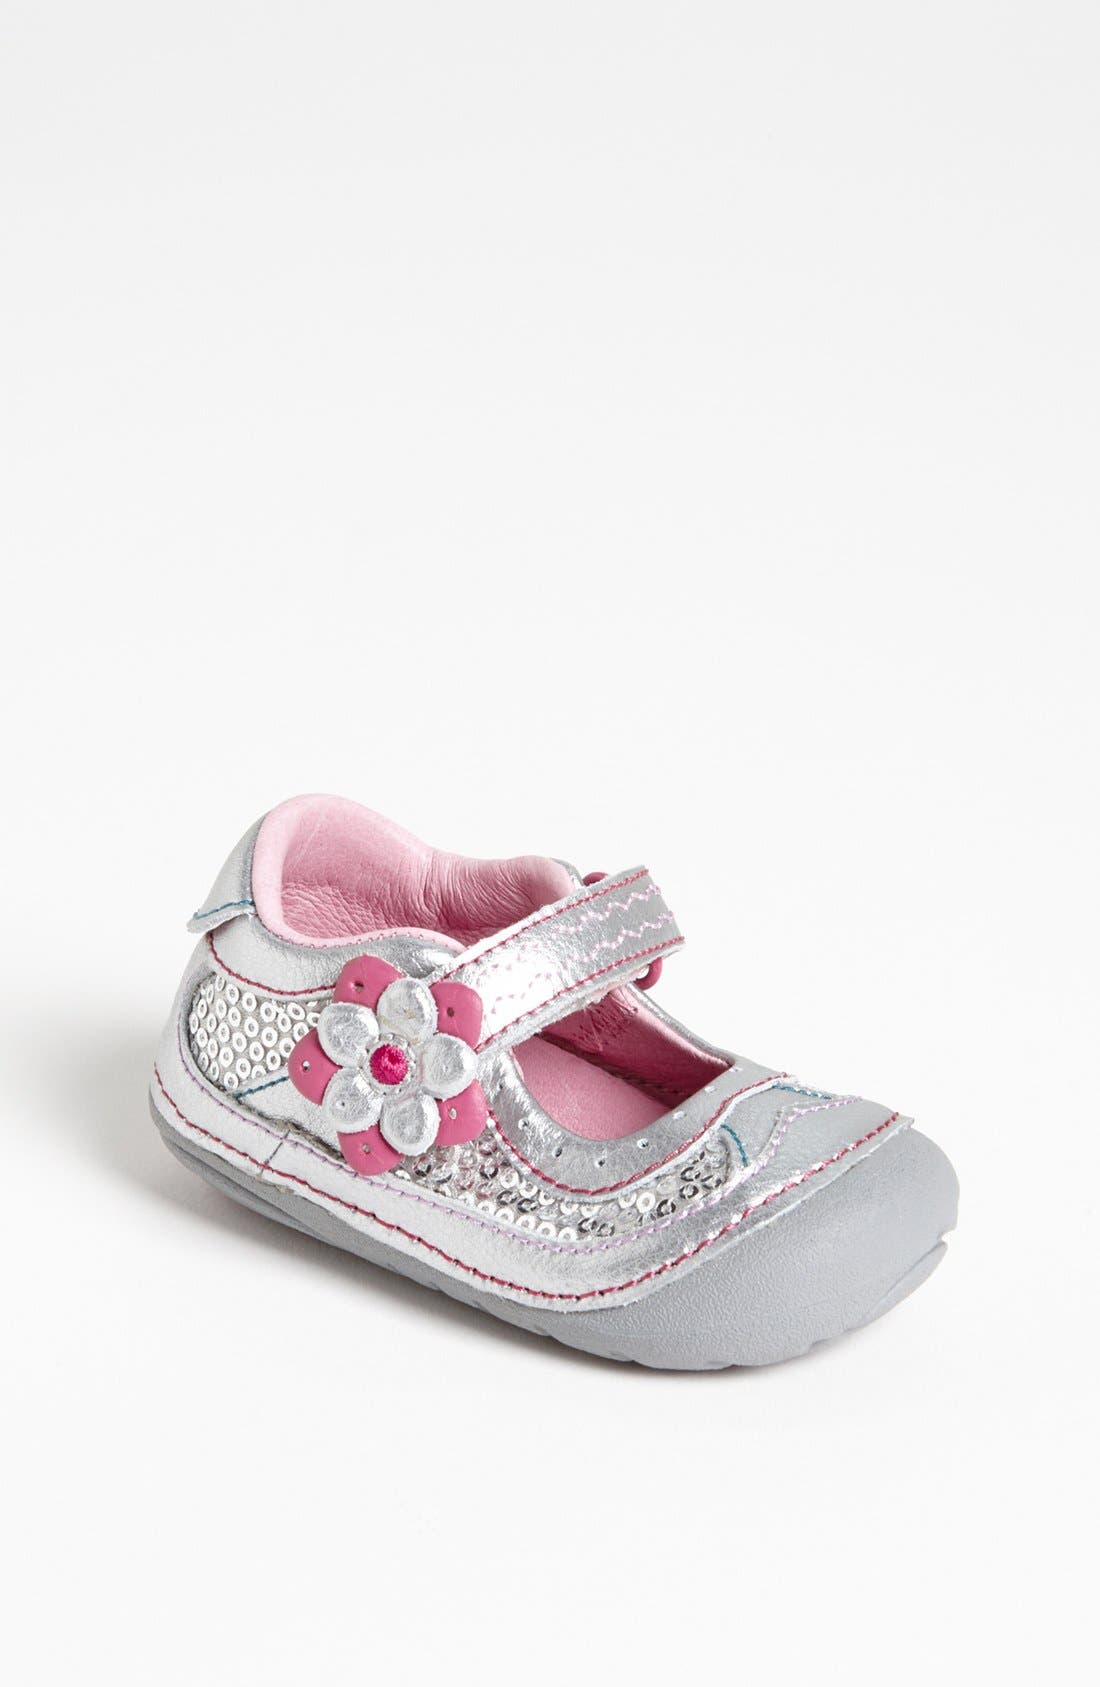 nordstrom stride rite shoes